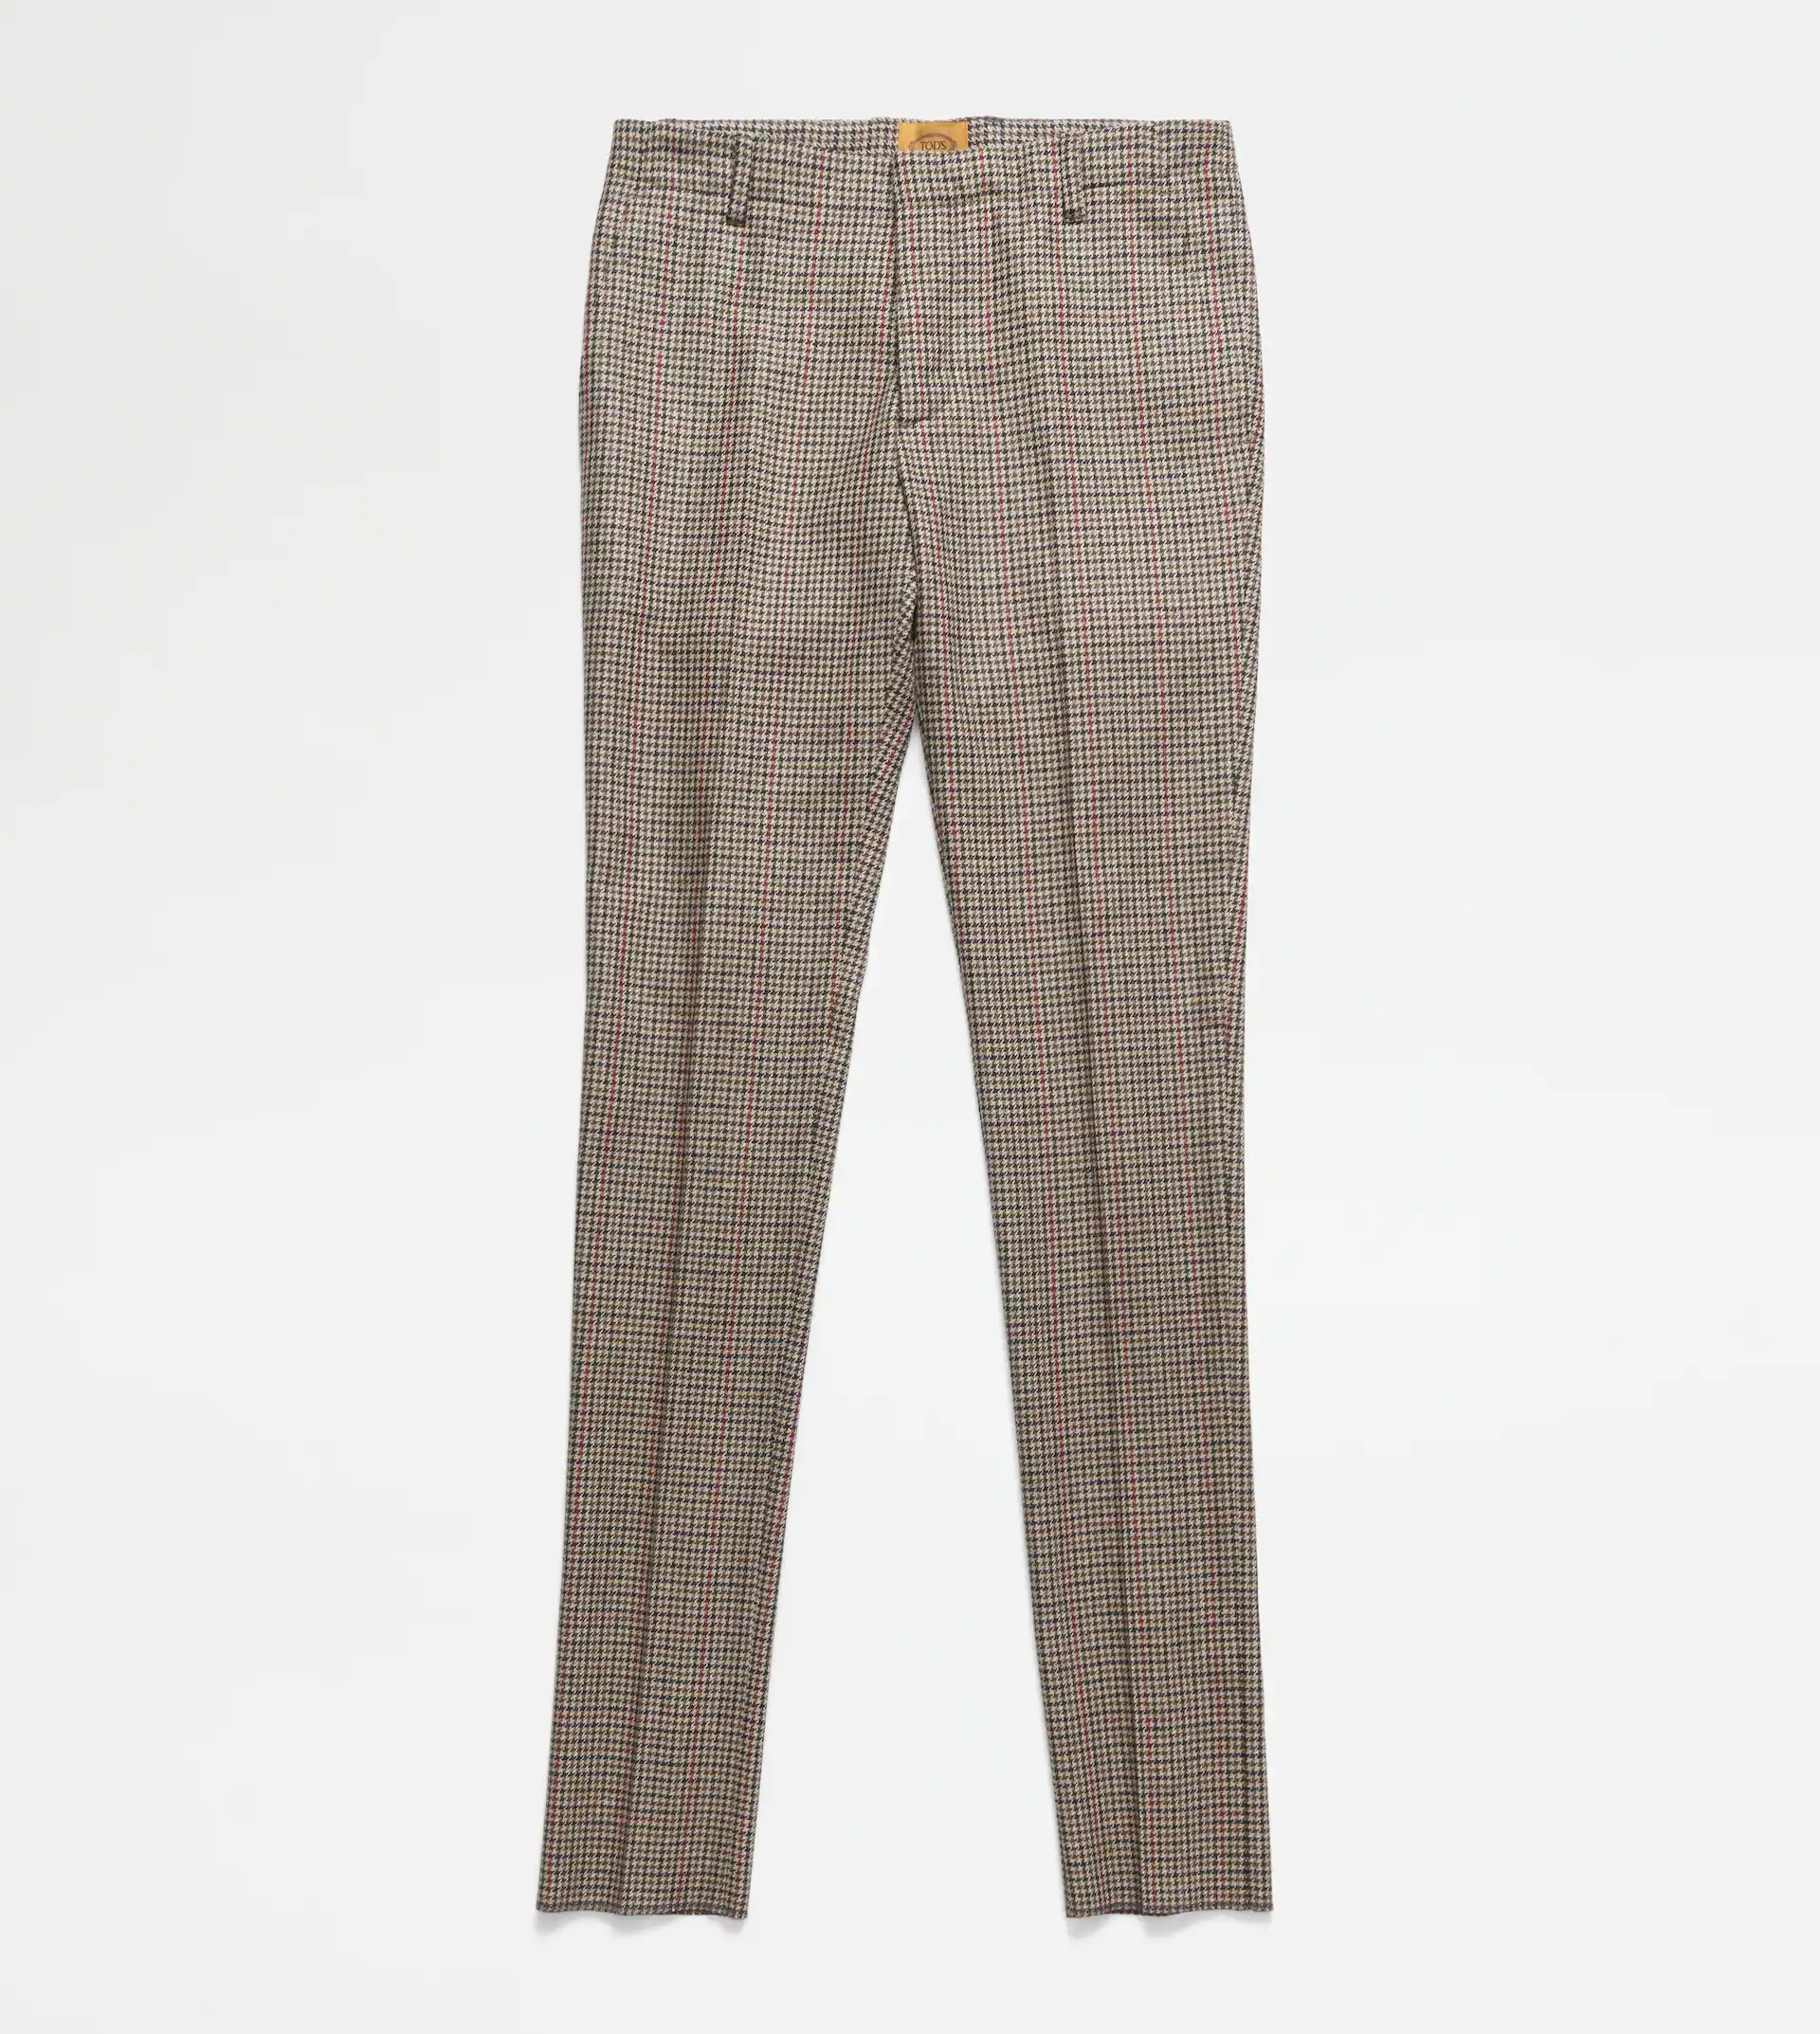 HOUNDSTOOTH TROUSERS - RED, BLUE, BROWN - 1